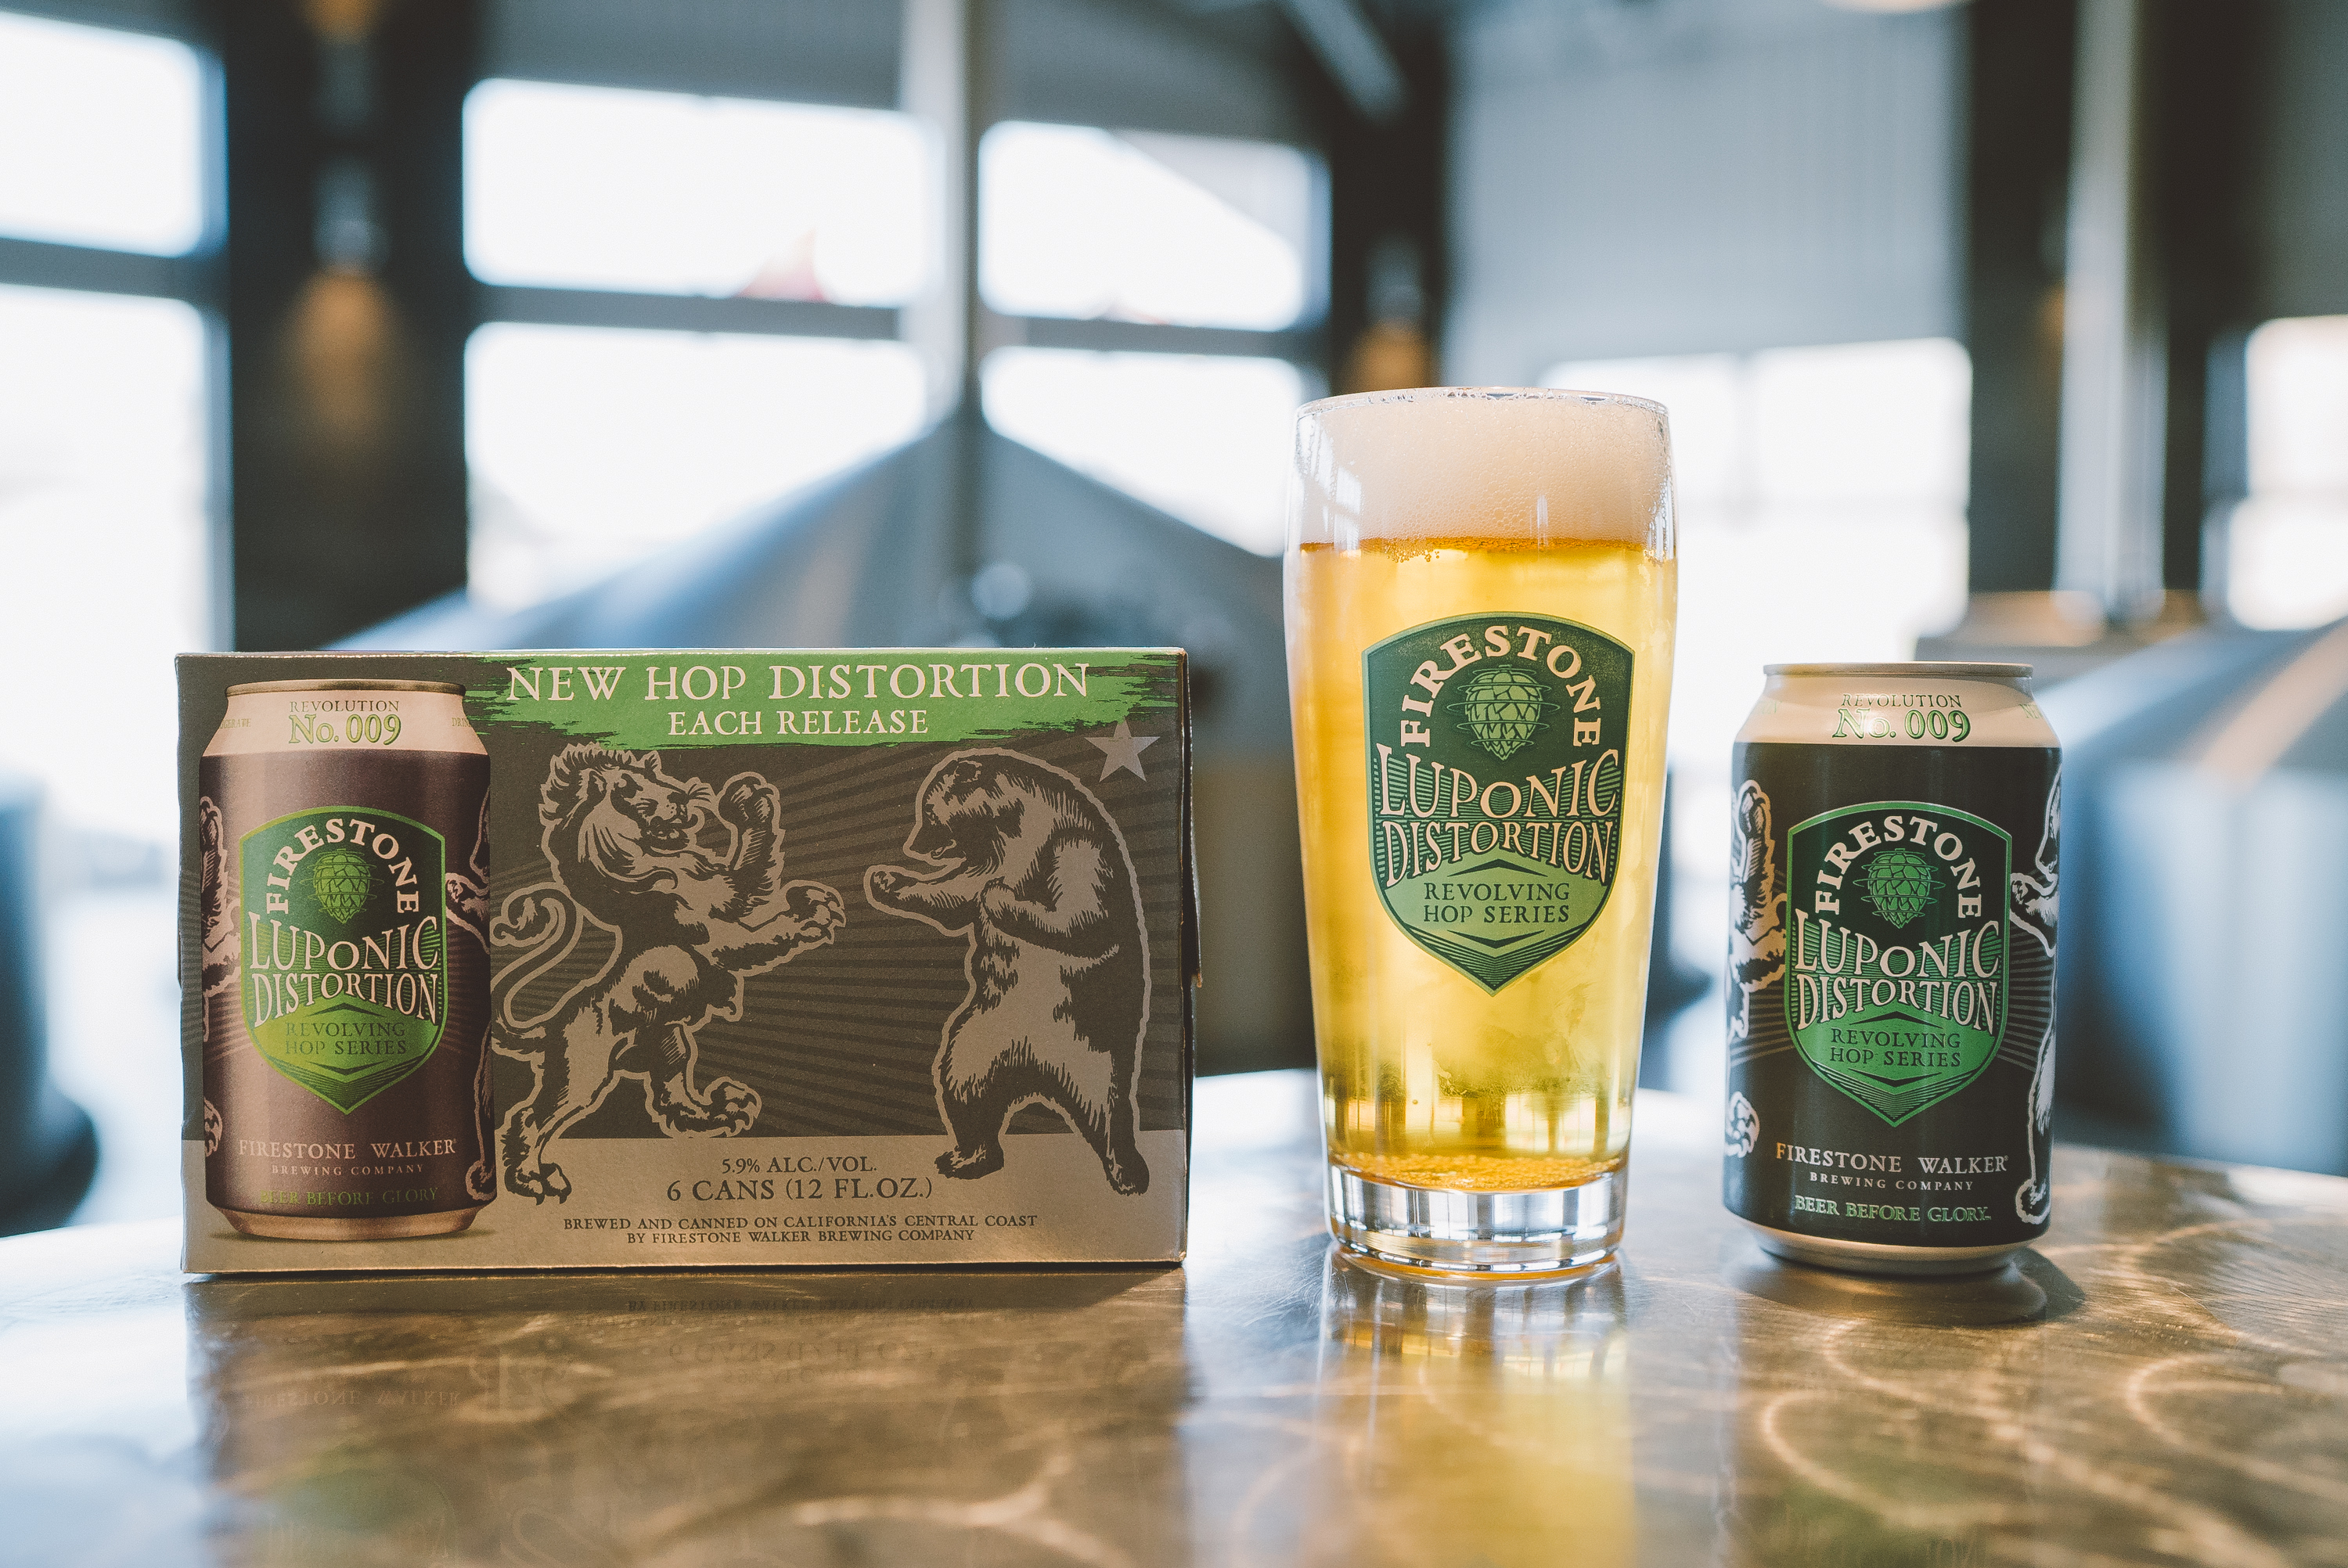 image of Luponic Distortion Revolution No. 009 courtesy of Firestone Walker Brewing